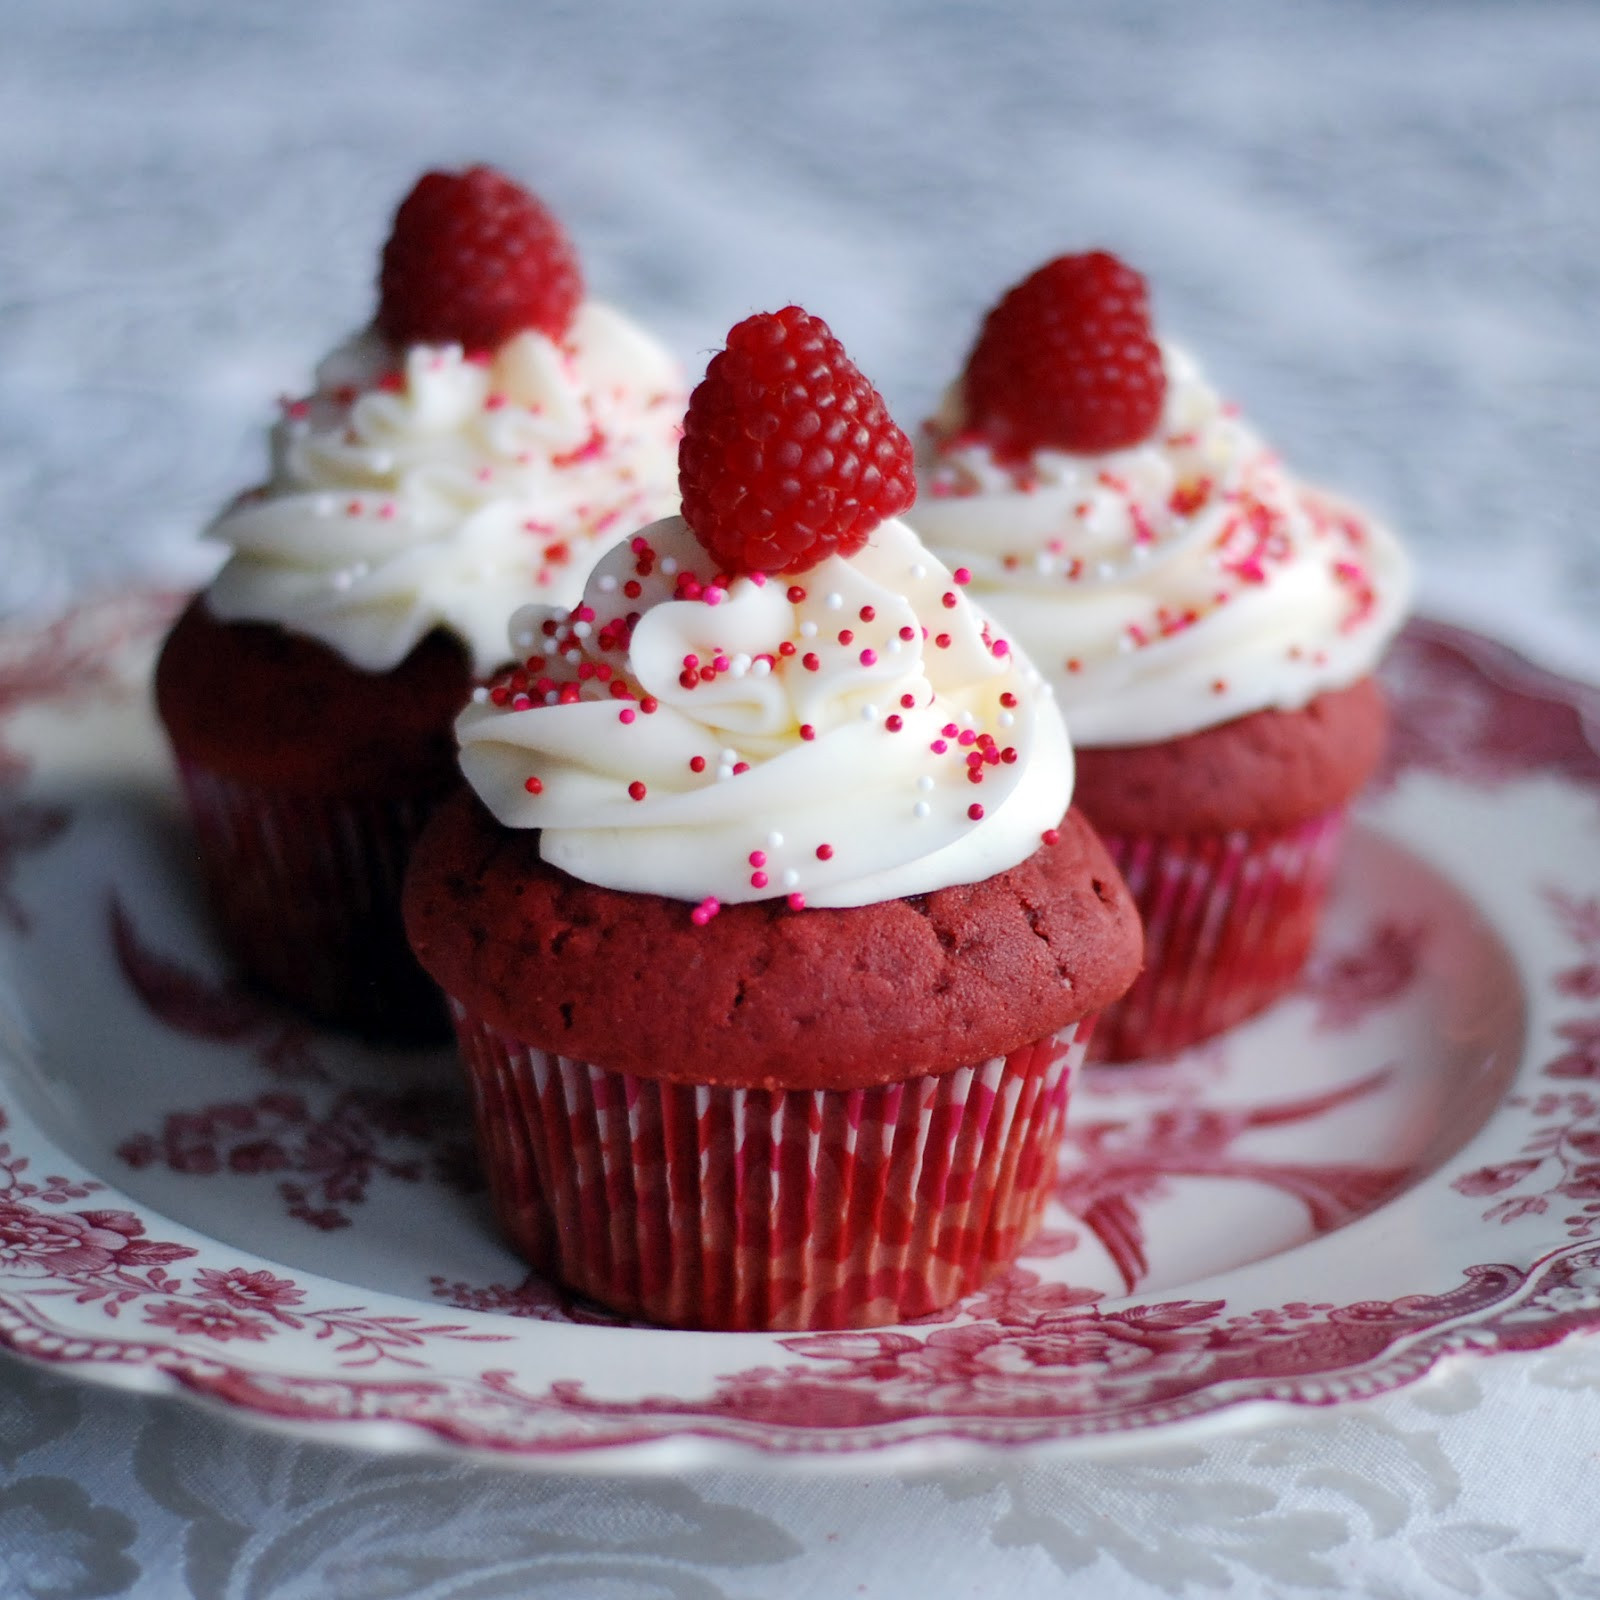 Red Velvet Cupcakes With Cream Cheese Frosting
 Sprinkle Charms Red Velvet Cupcakes with Cream Cheese